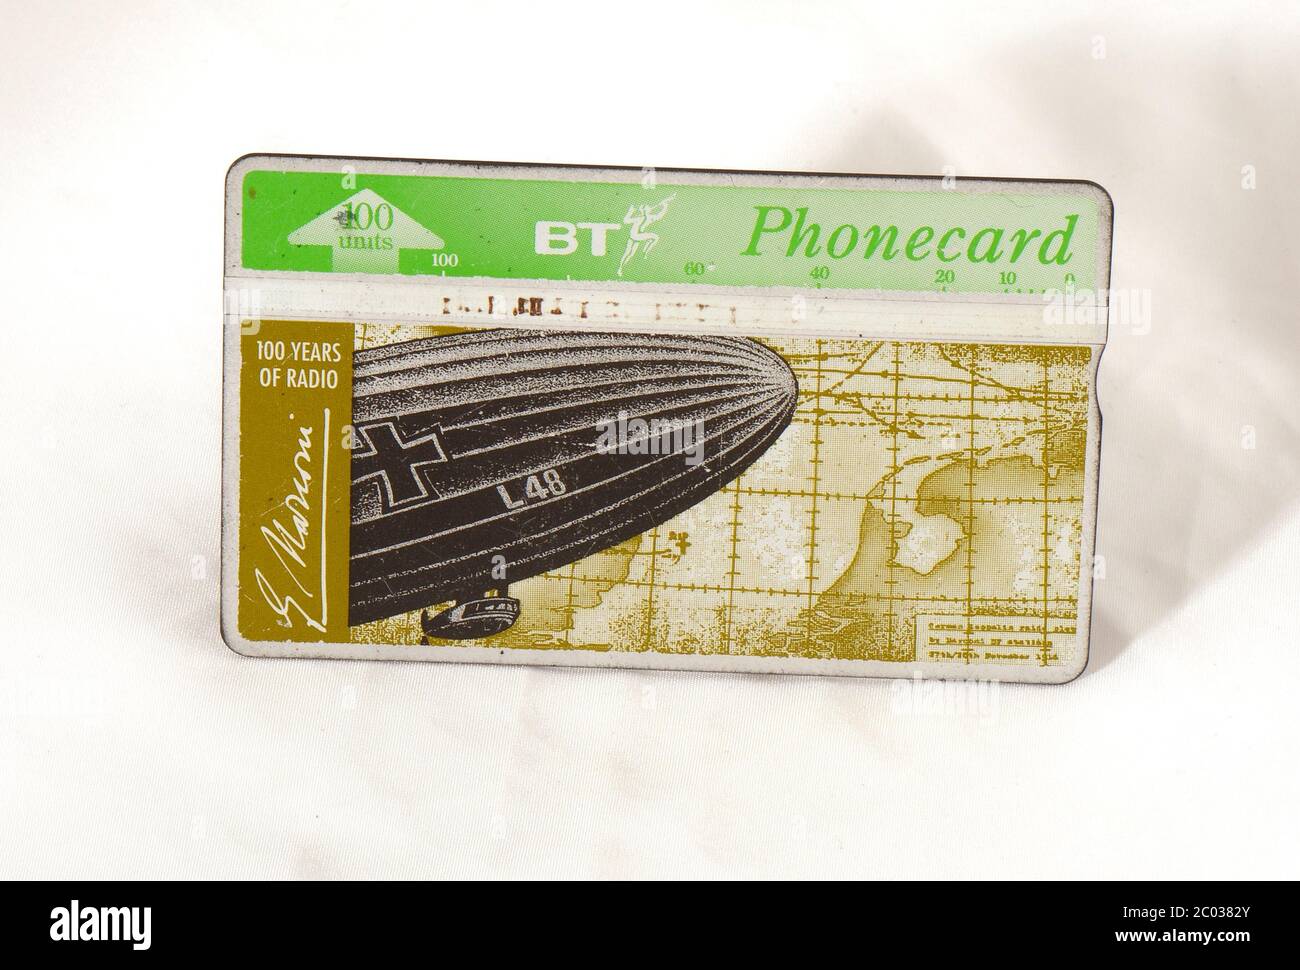 British Telecom pre paid public telephone card with image on Zeppelin L48 and it's final location, shot down using radio Stock Photo